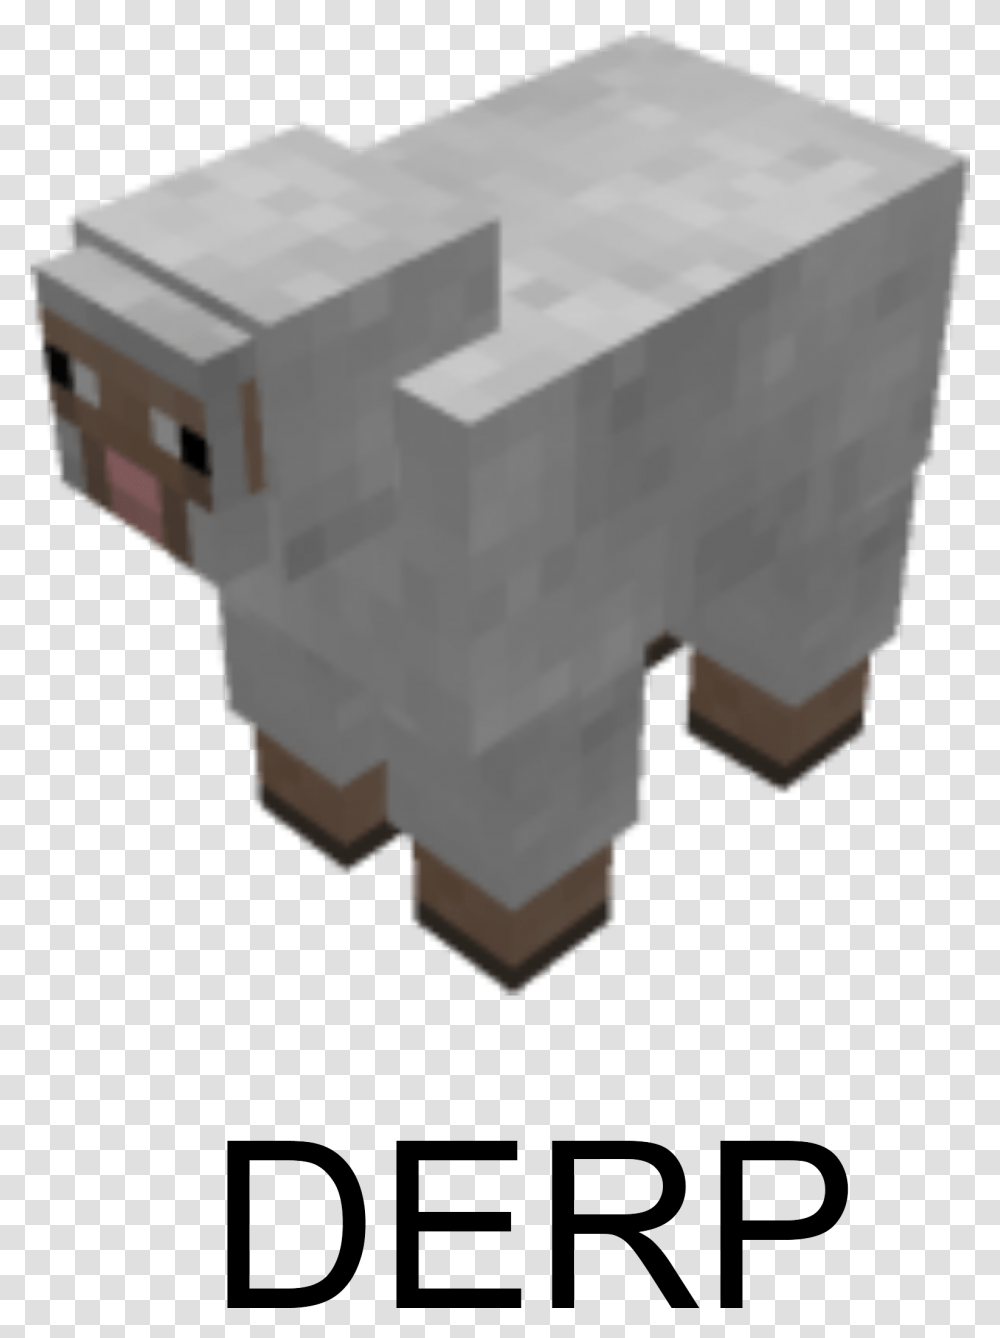 Derpy Face Minecraft Sheep Black And White, Crystal, Ninja, Mineral Transparent Png